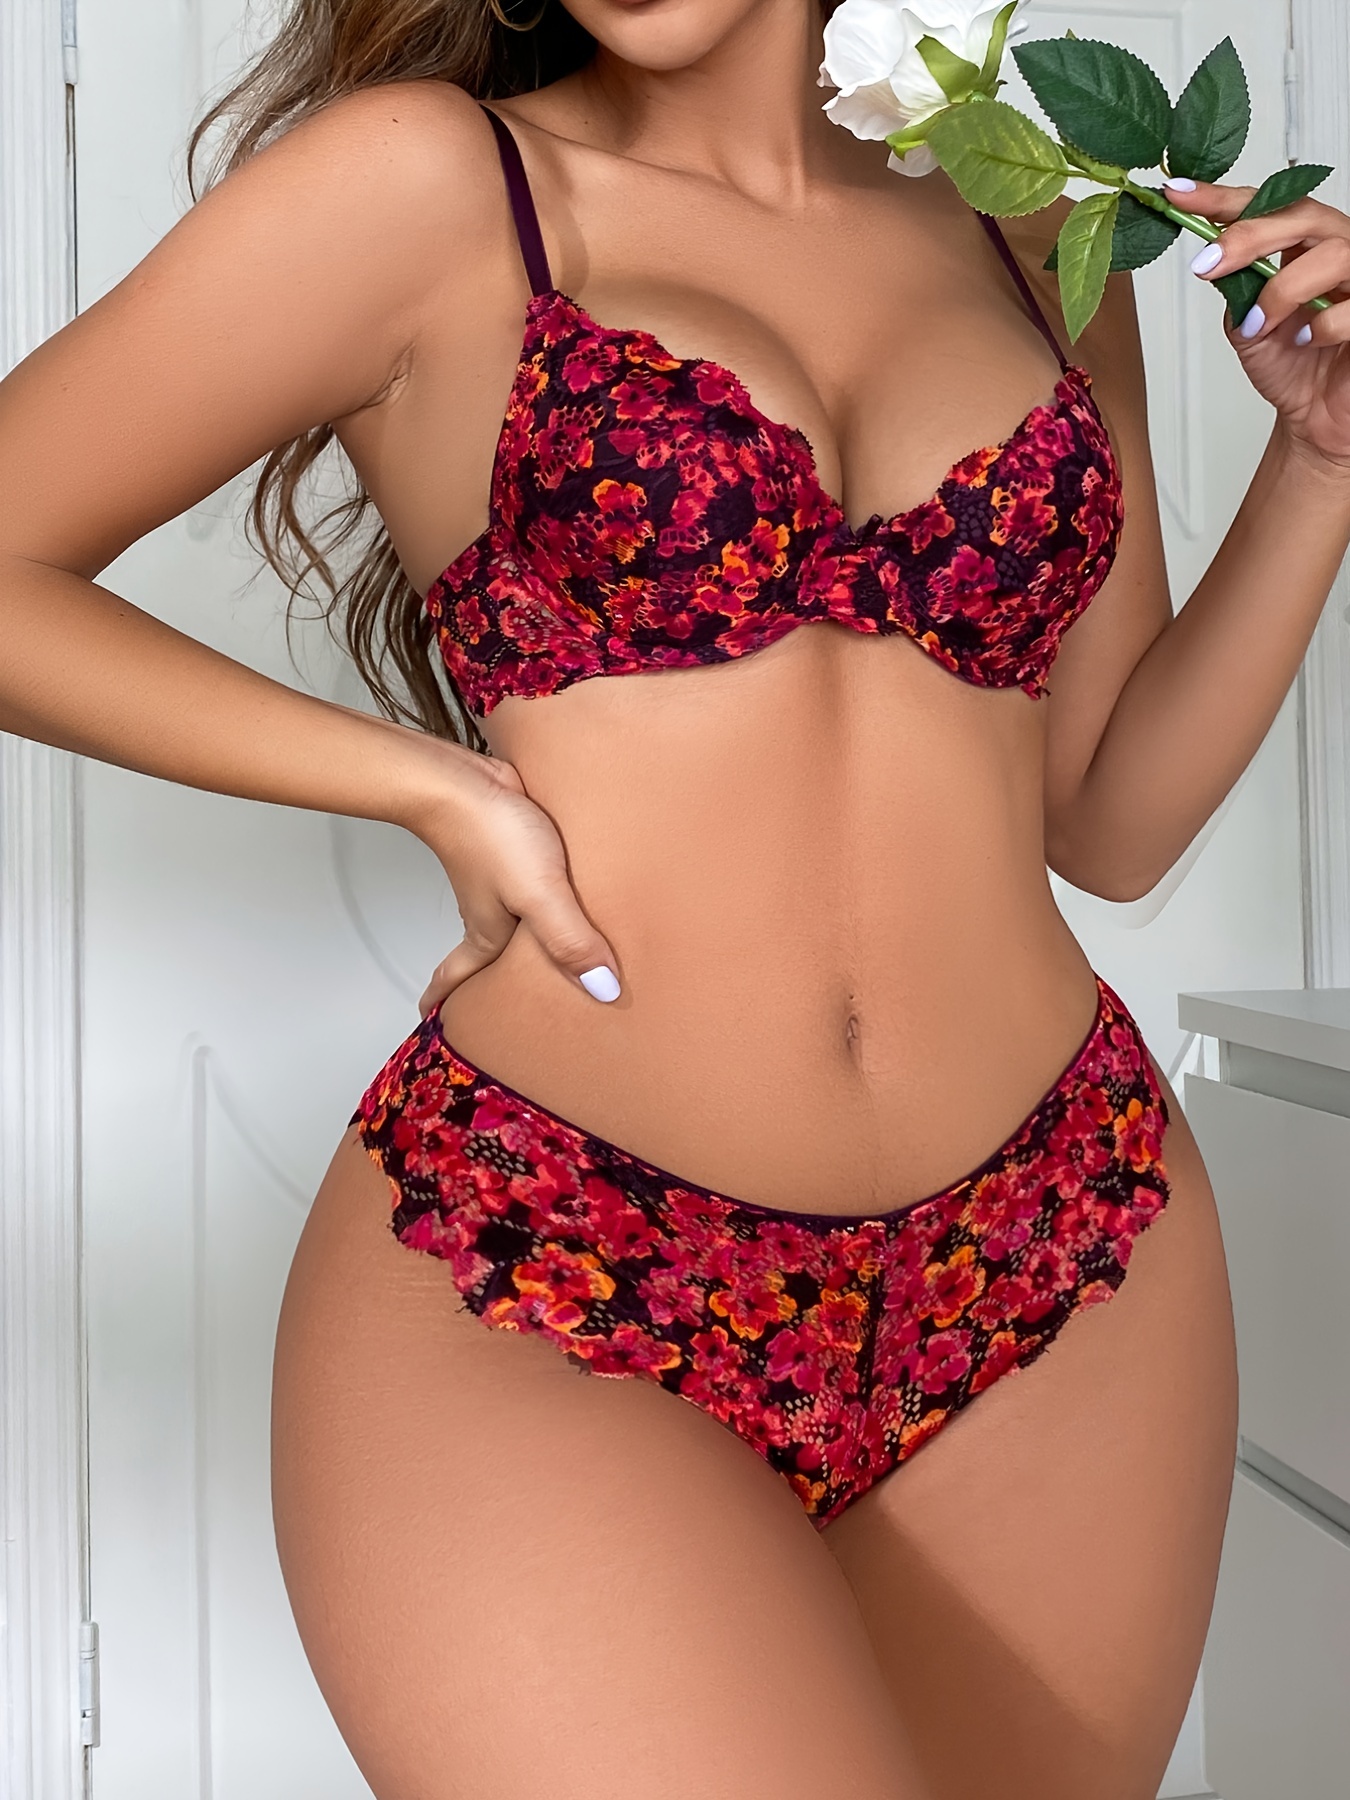 Floral Print Unlined Big Chest Fancy Bra Panty For Women